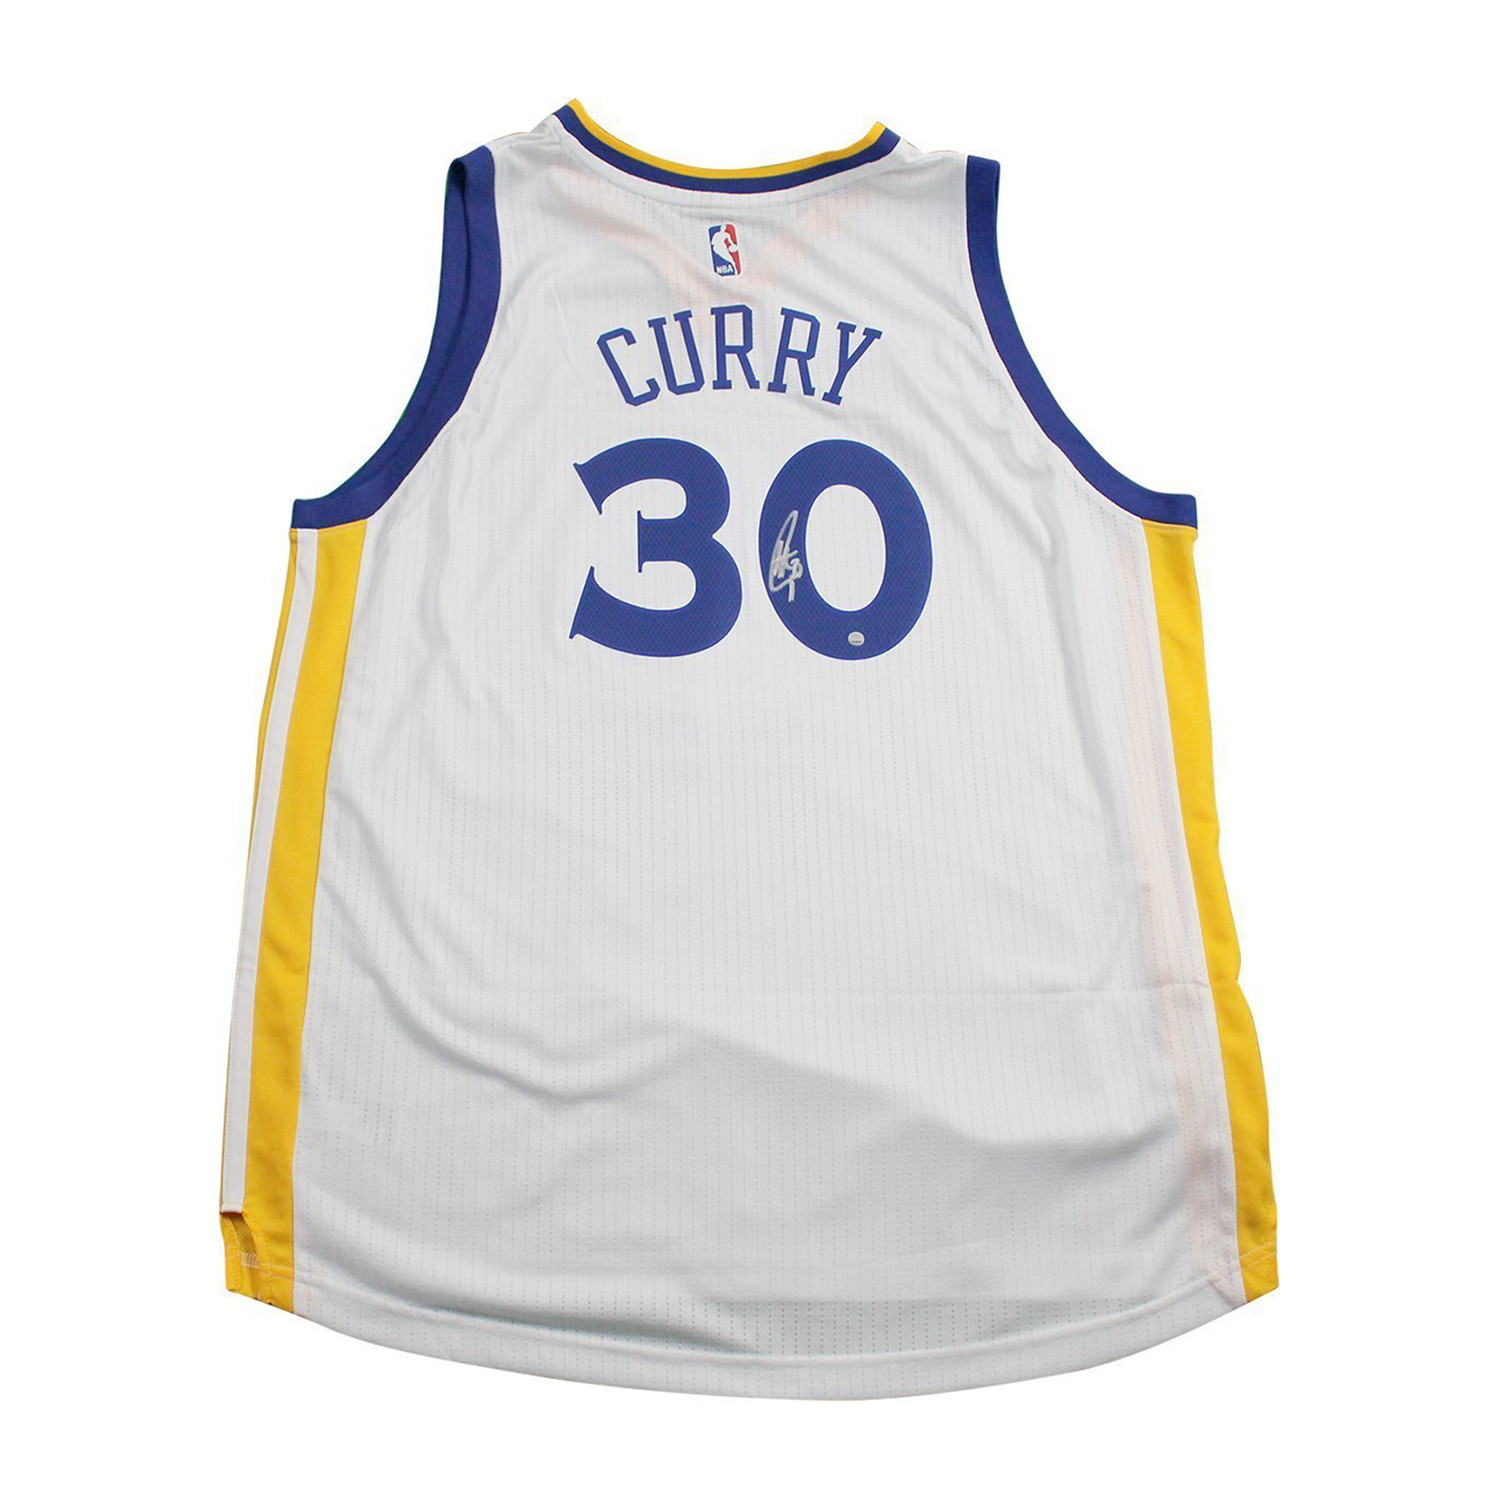 what is stephen curry's jersey number